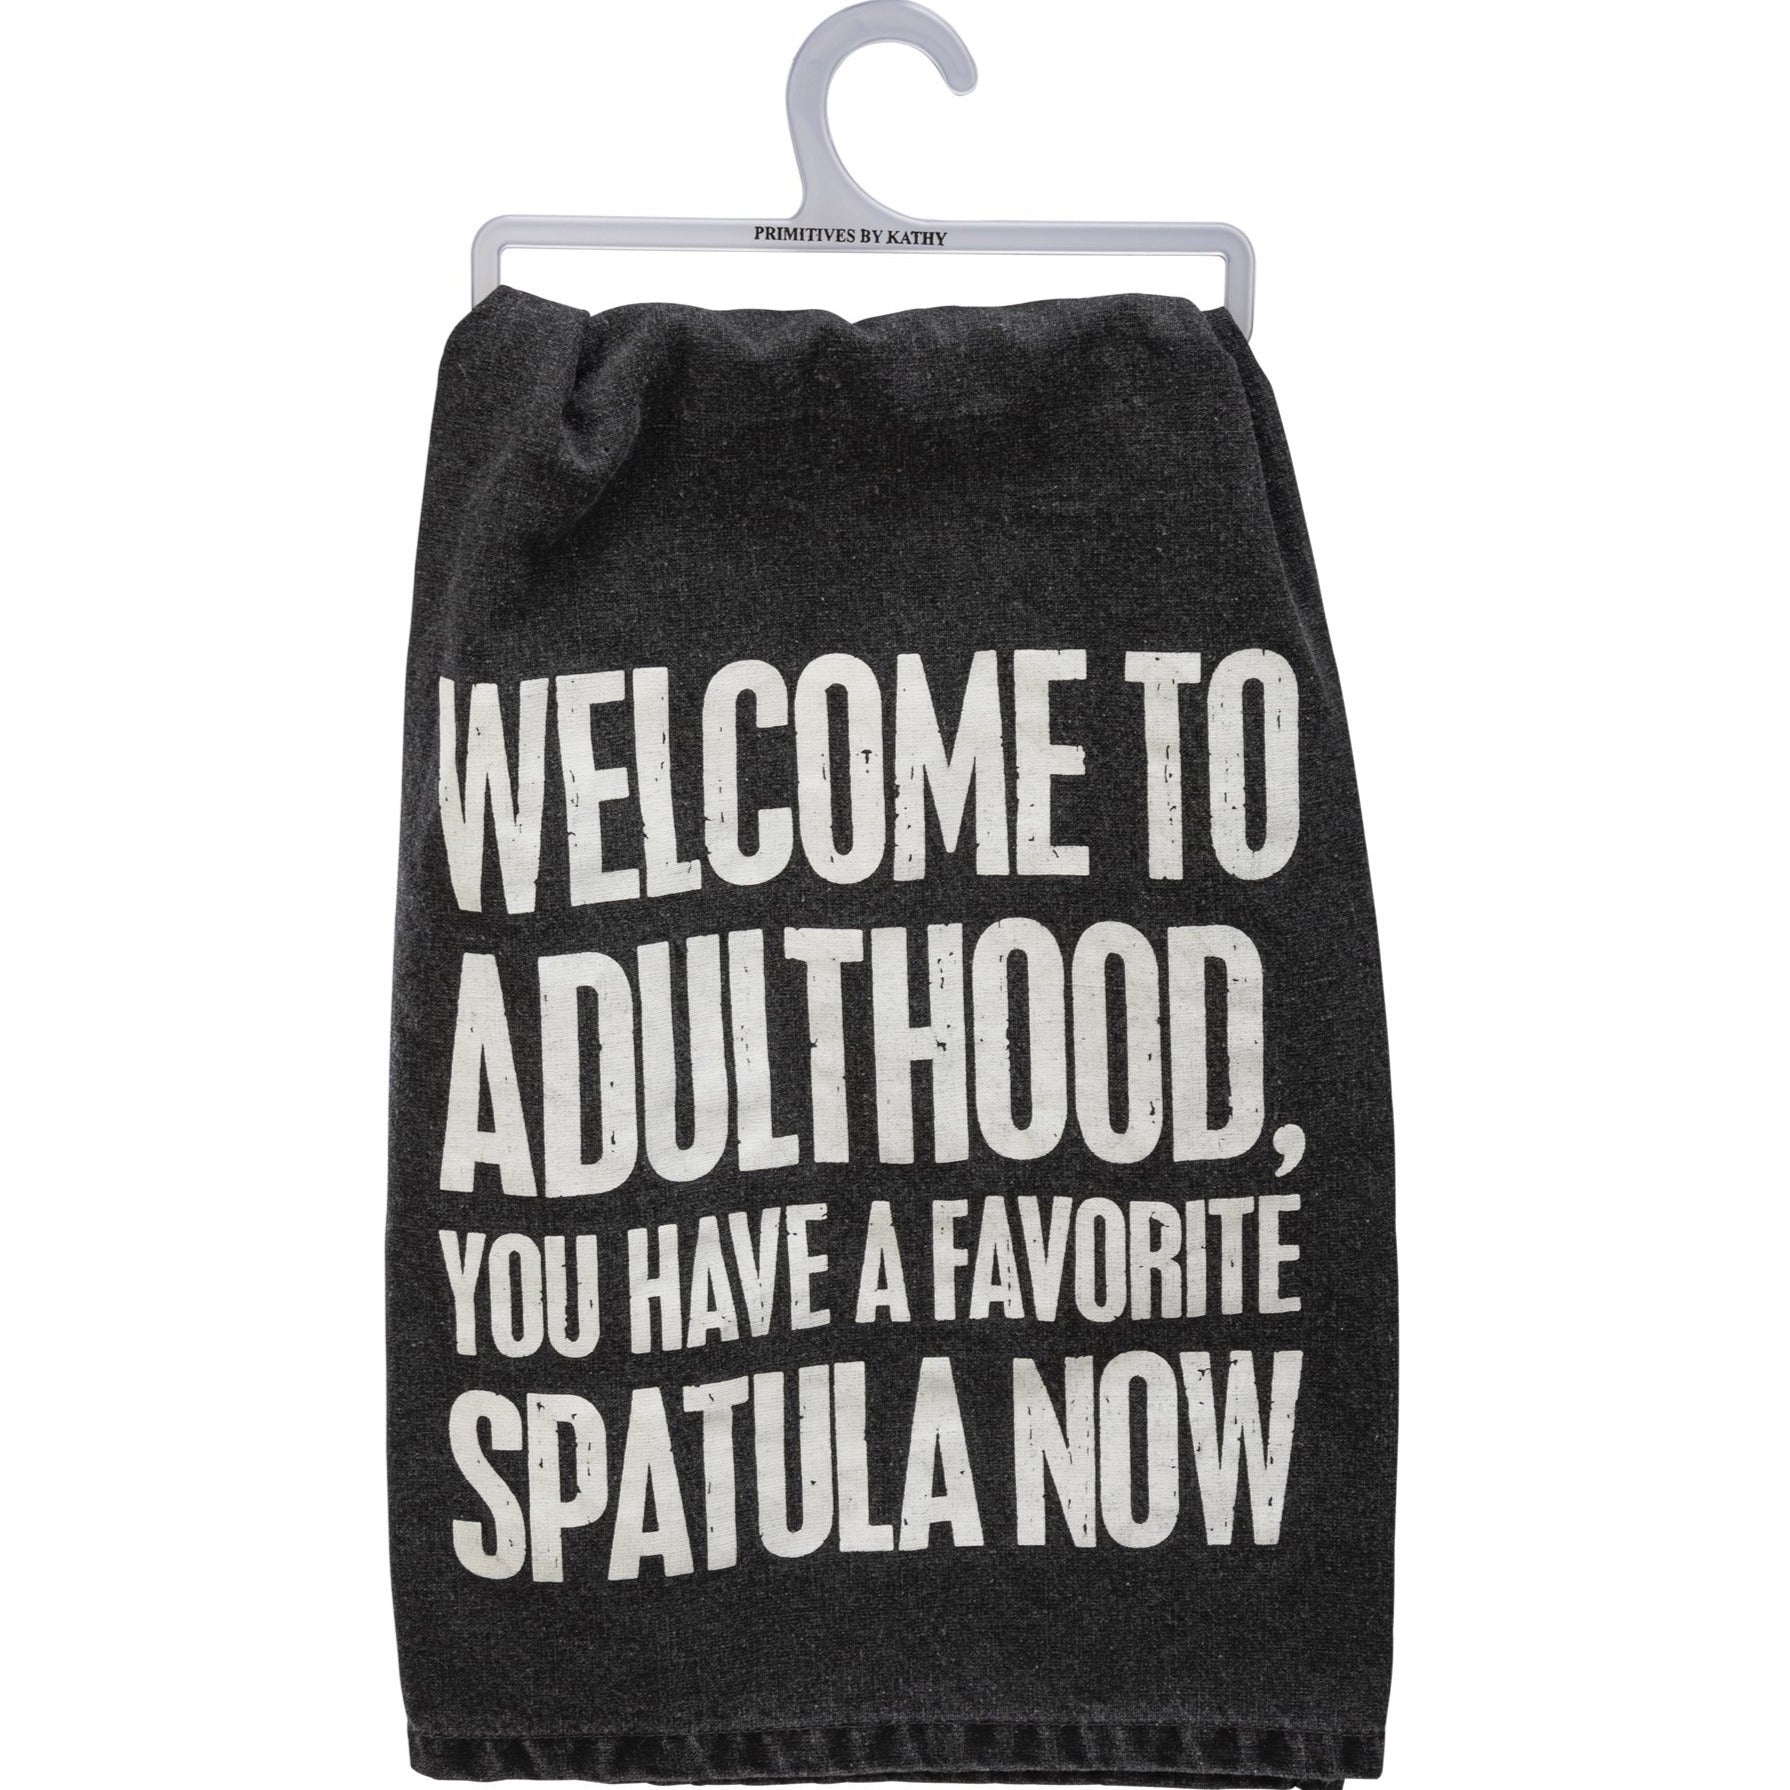 Welcome To Adulthood You Have A Favorite Spatula Now Dish Cloth Towel / Novelty Silly Tea Towels / Cute Hilarious Kitchen Hand Towel